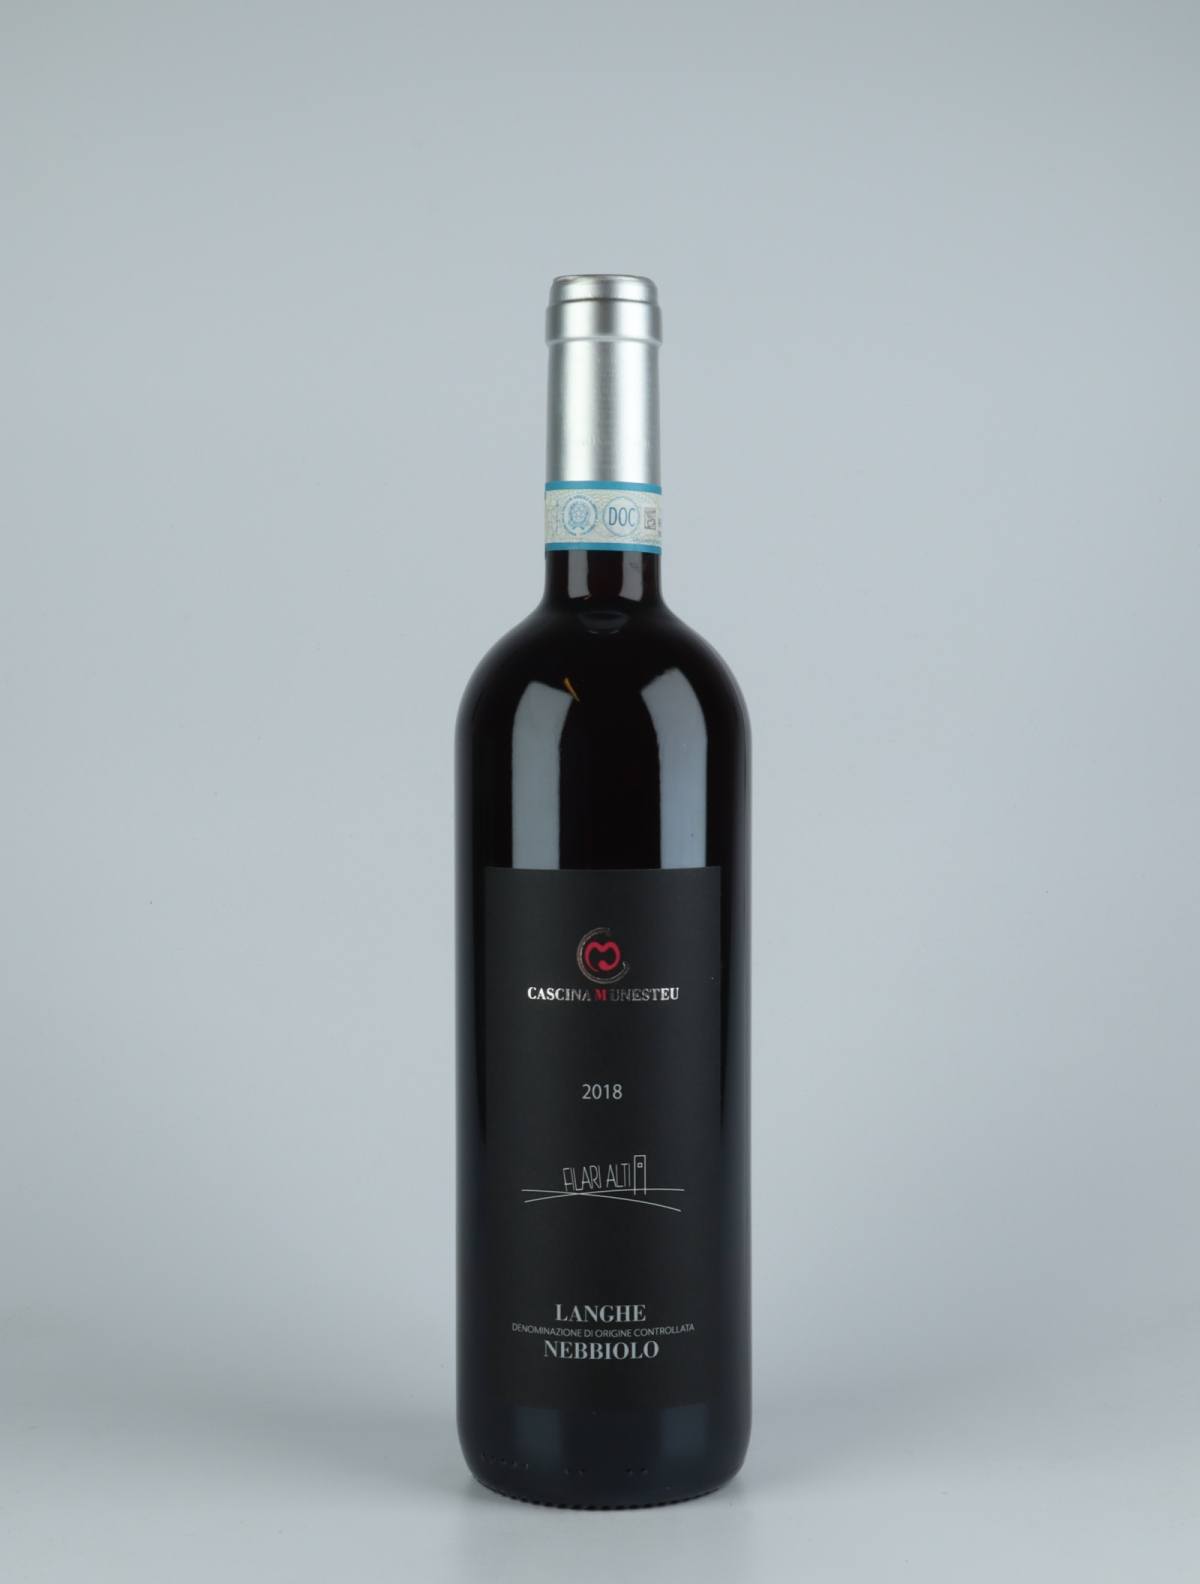 A bottle 2018 Langhe Nebbiolo - Filari Alti Red wine from Cascina Munesteu, Piedmont in Italy